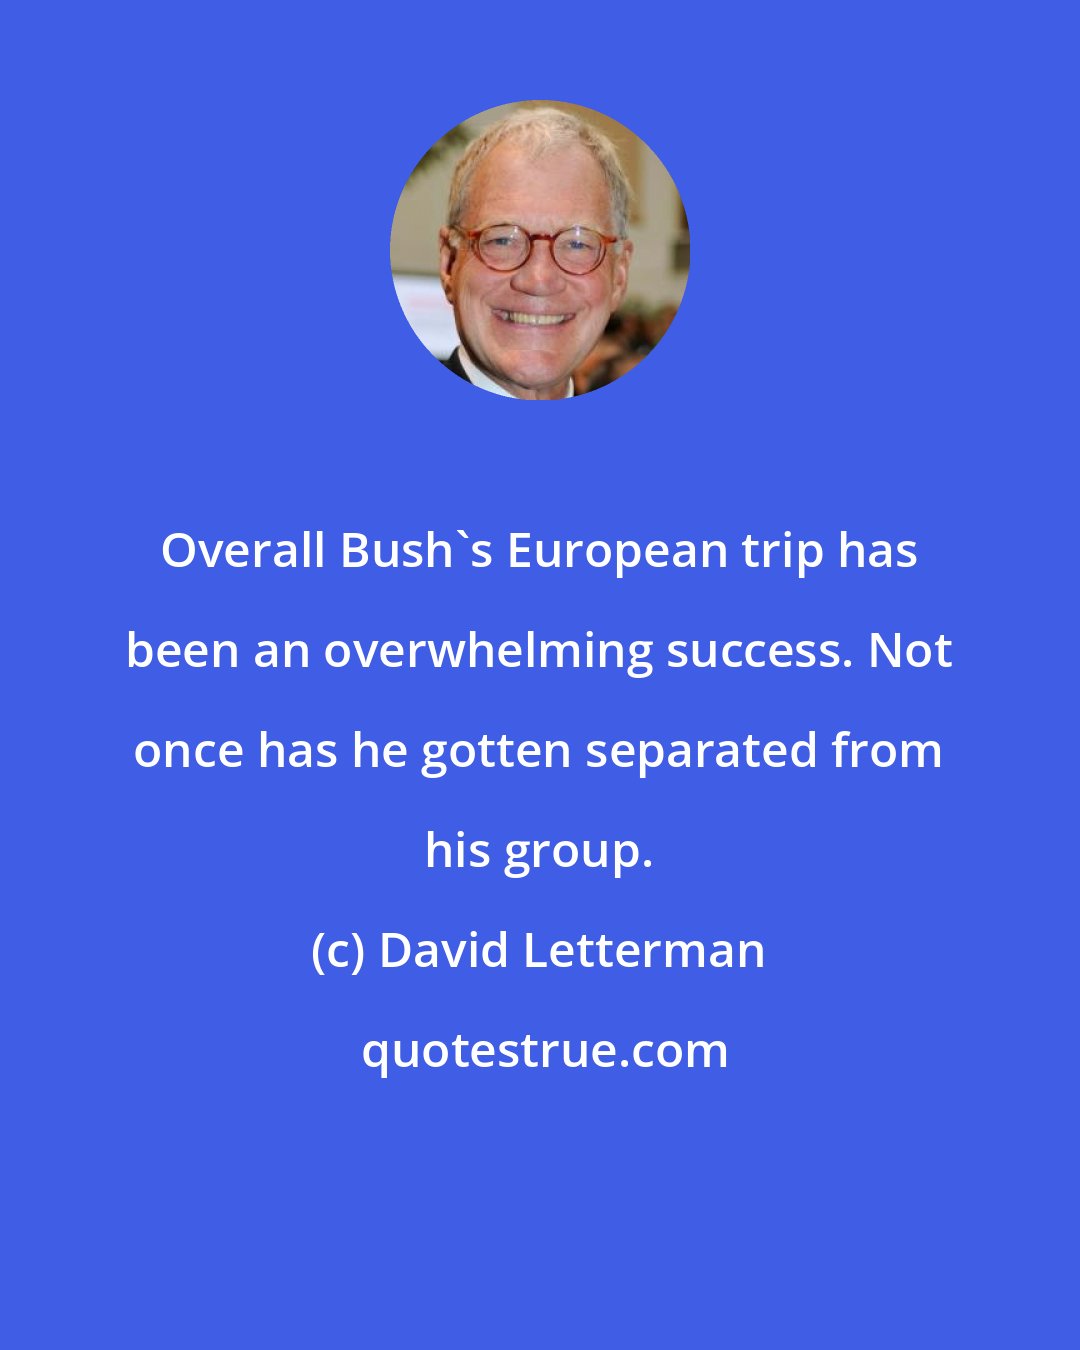 David Letterman: Overall Bush's European trip has been an overwhelming success. Not once has he gotten separated from his group.